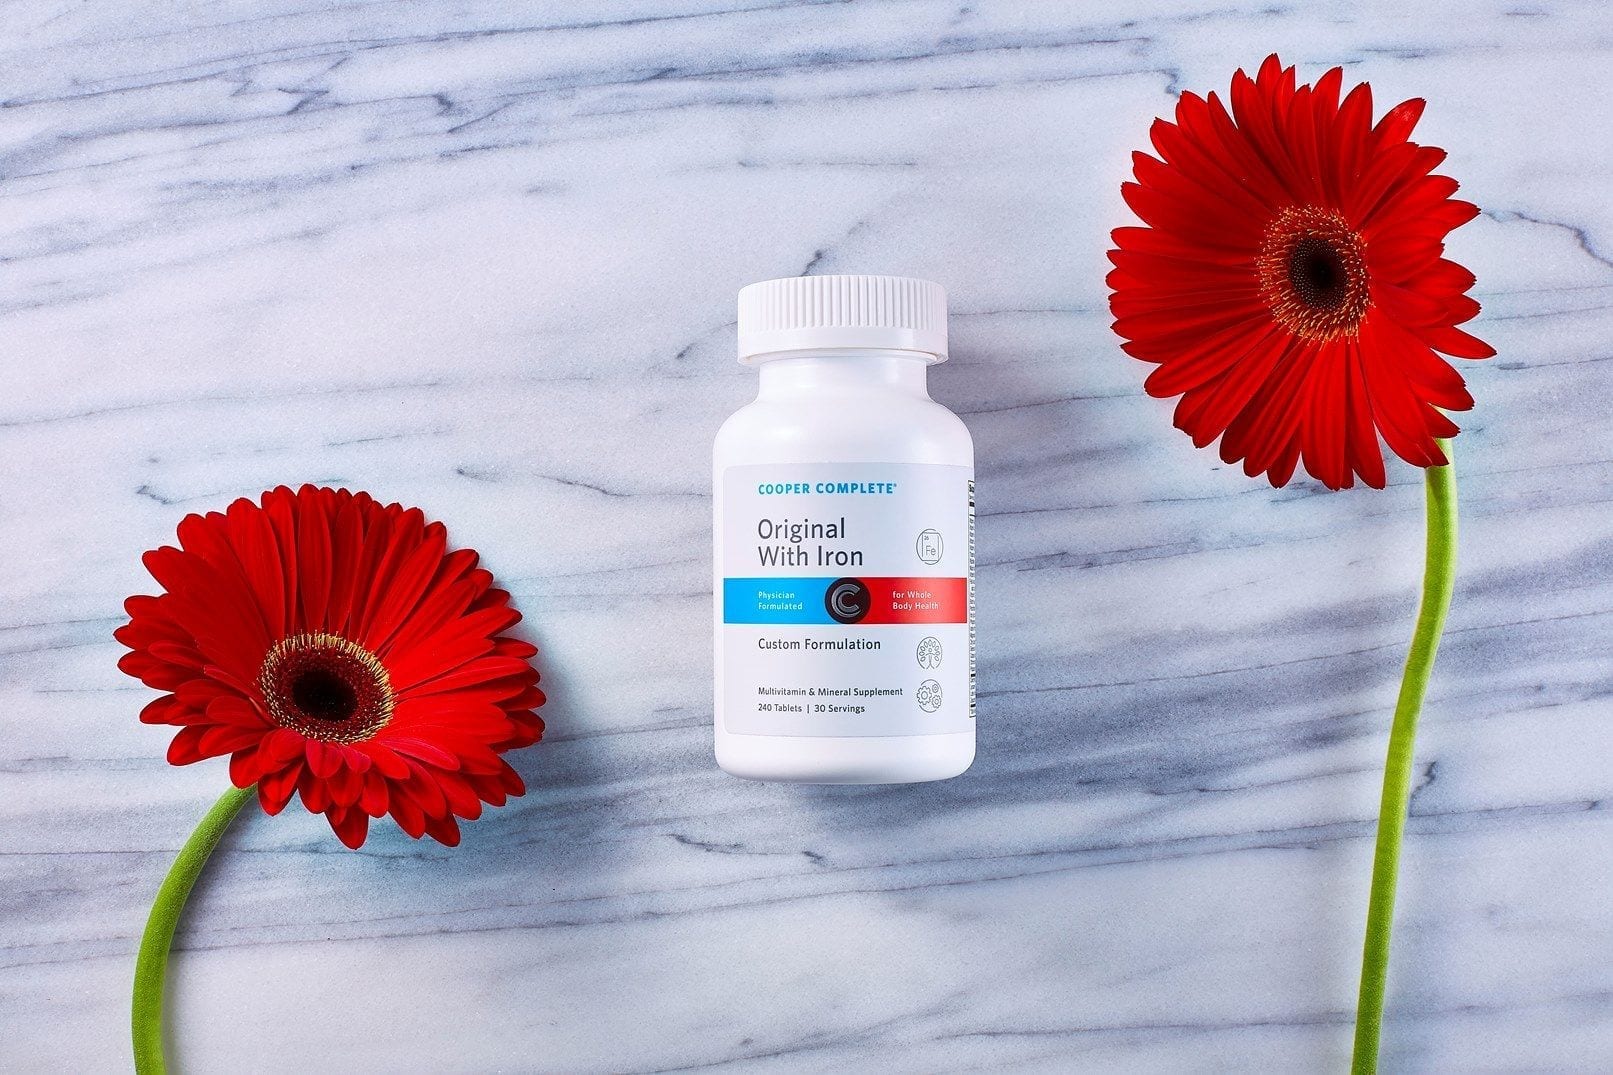 Cooper Complete Original with Iron Multivitamin and Mineral Formulation bottle with red flowers